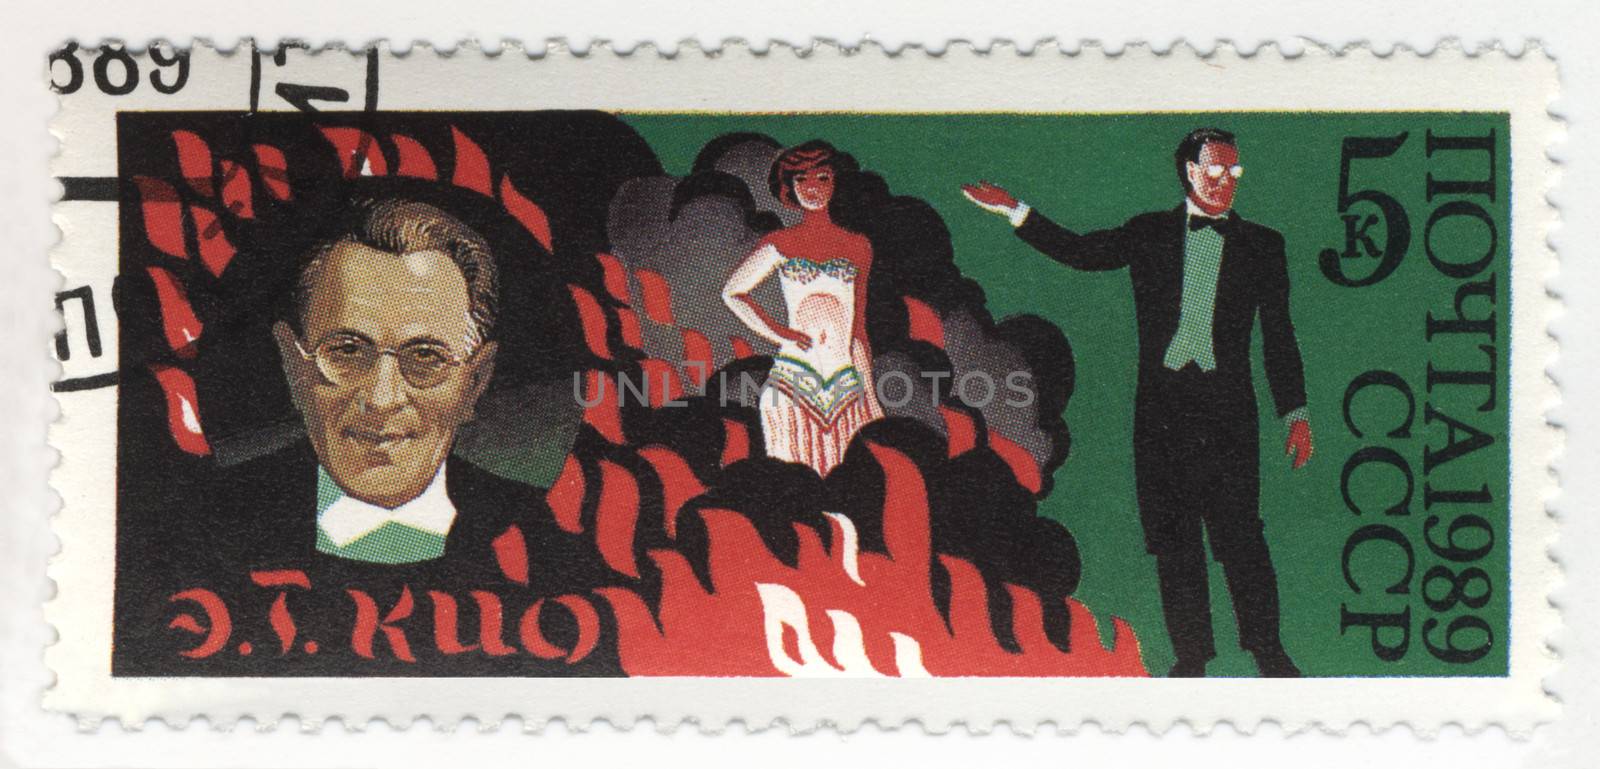 Circus magician Emil Kio on post stamp by wander